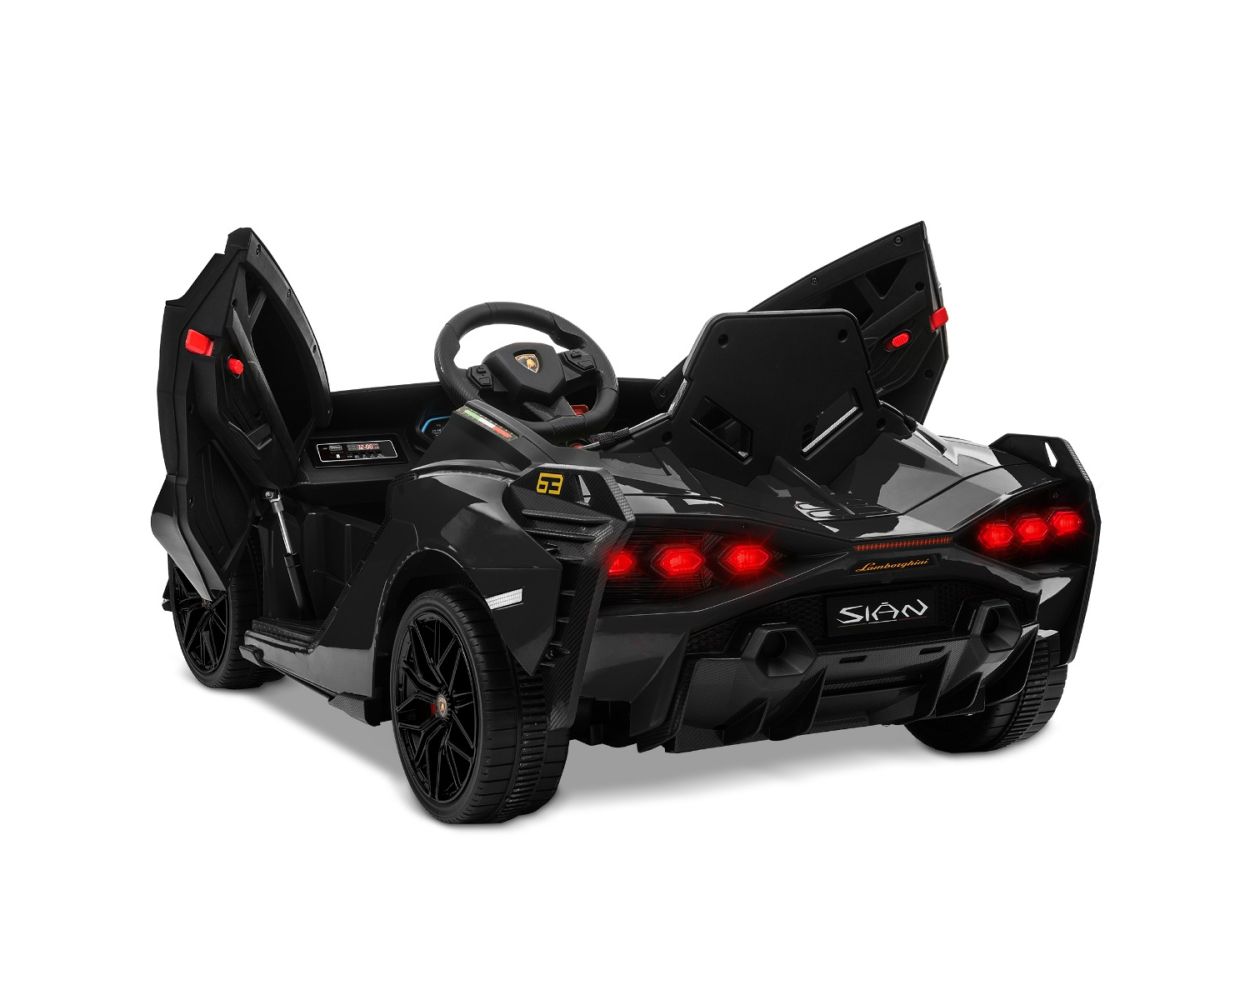 New in Box Kidzone Lamborghini Sian Roadster Battery Powered Ride On and Remote Control Sports Car Toy